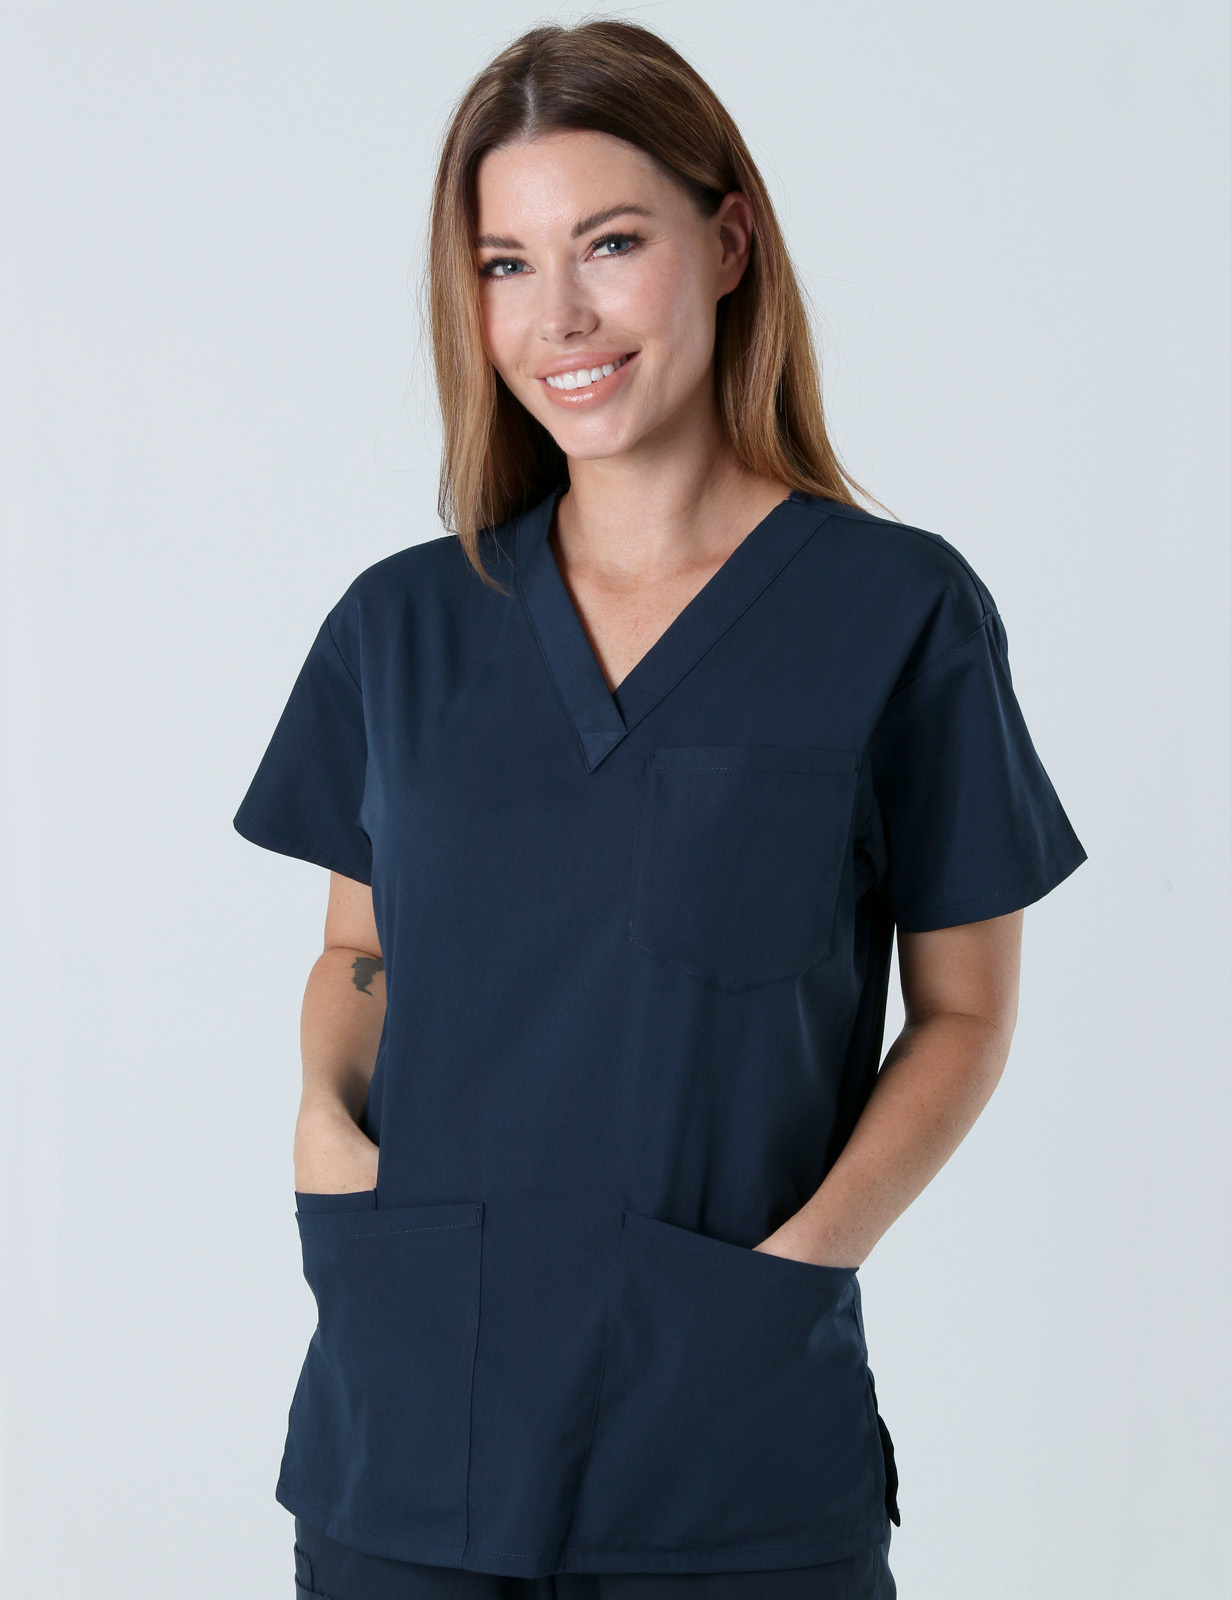 Melbourne Hospital - Wards CN (4 Pocket Scrub Top and Cargo Pants in Navy incl Logos)